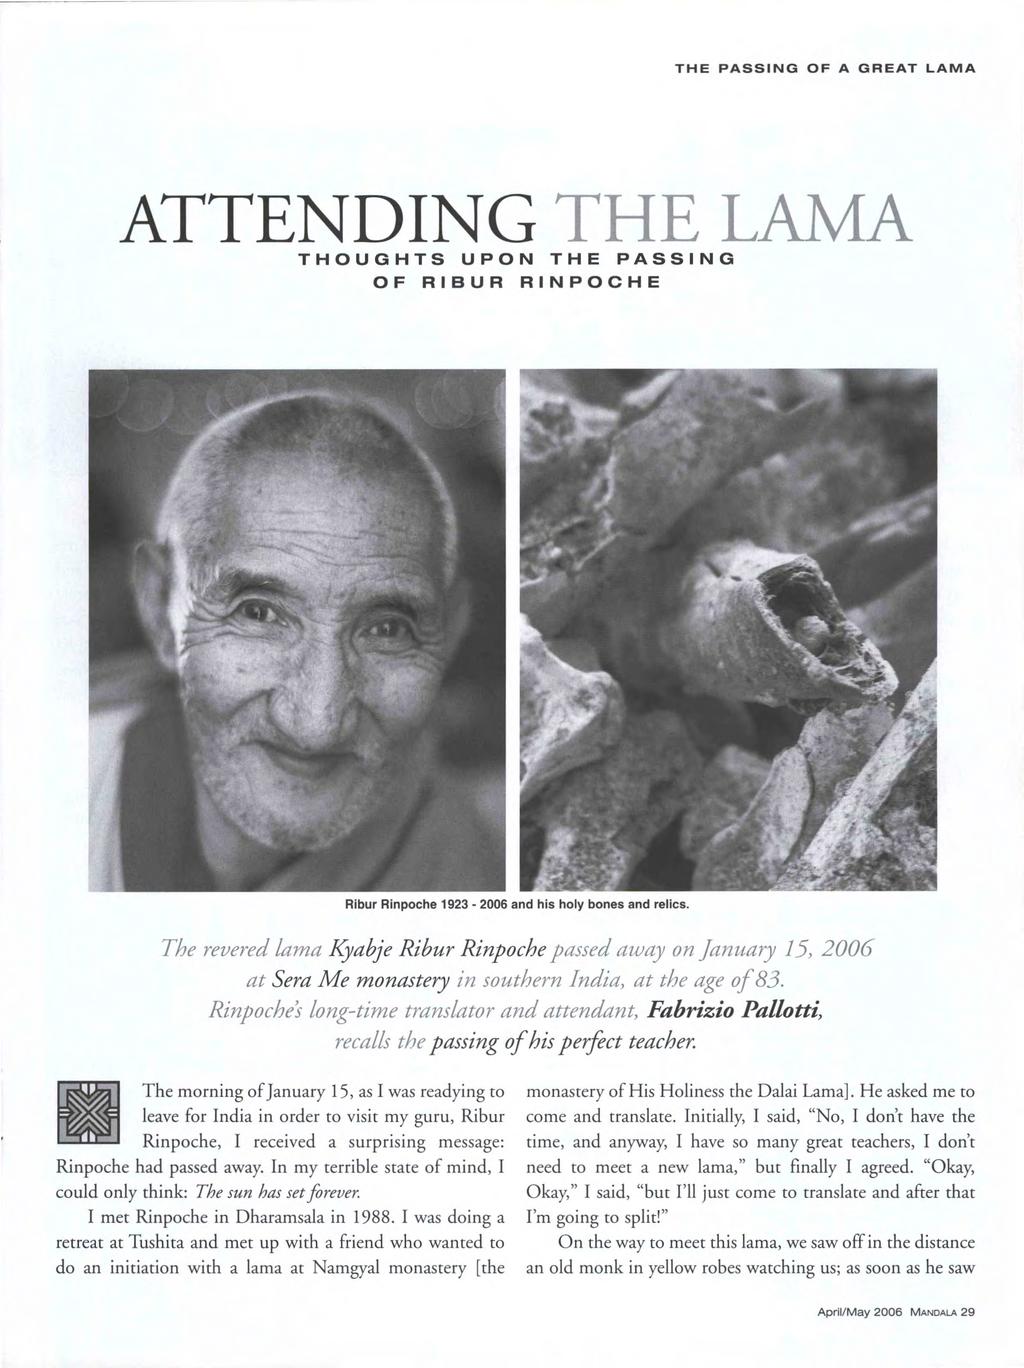 THE PASSING OF A GREAT LAMA ATTENDING THE LAMA THOUGHTS UPON THE PASSING OF RIBUR RINPOCHE Ribur Rinpoche 1923-2006 and his holy bones and relics.